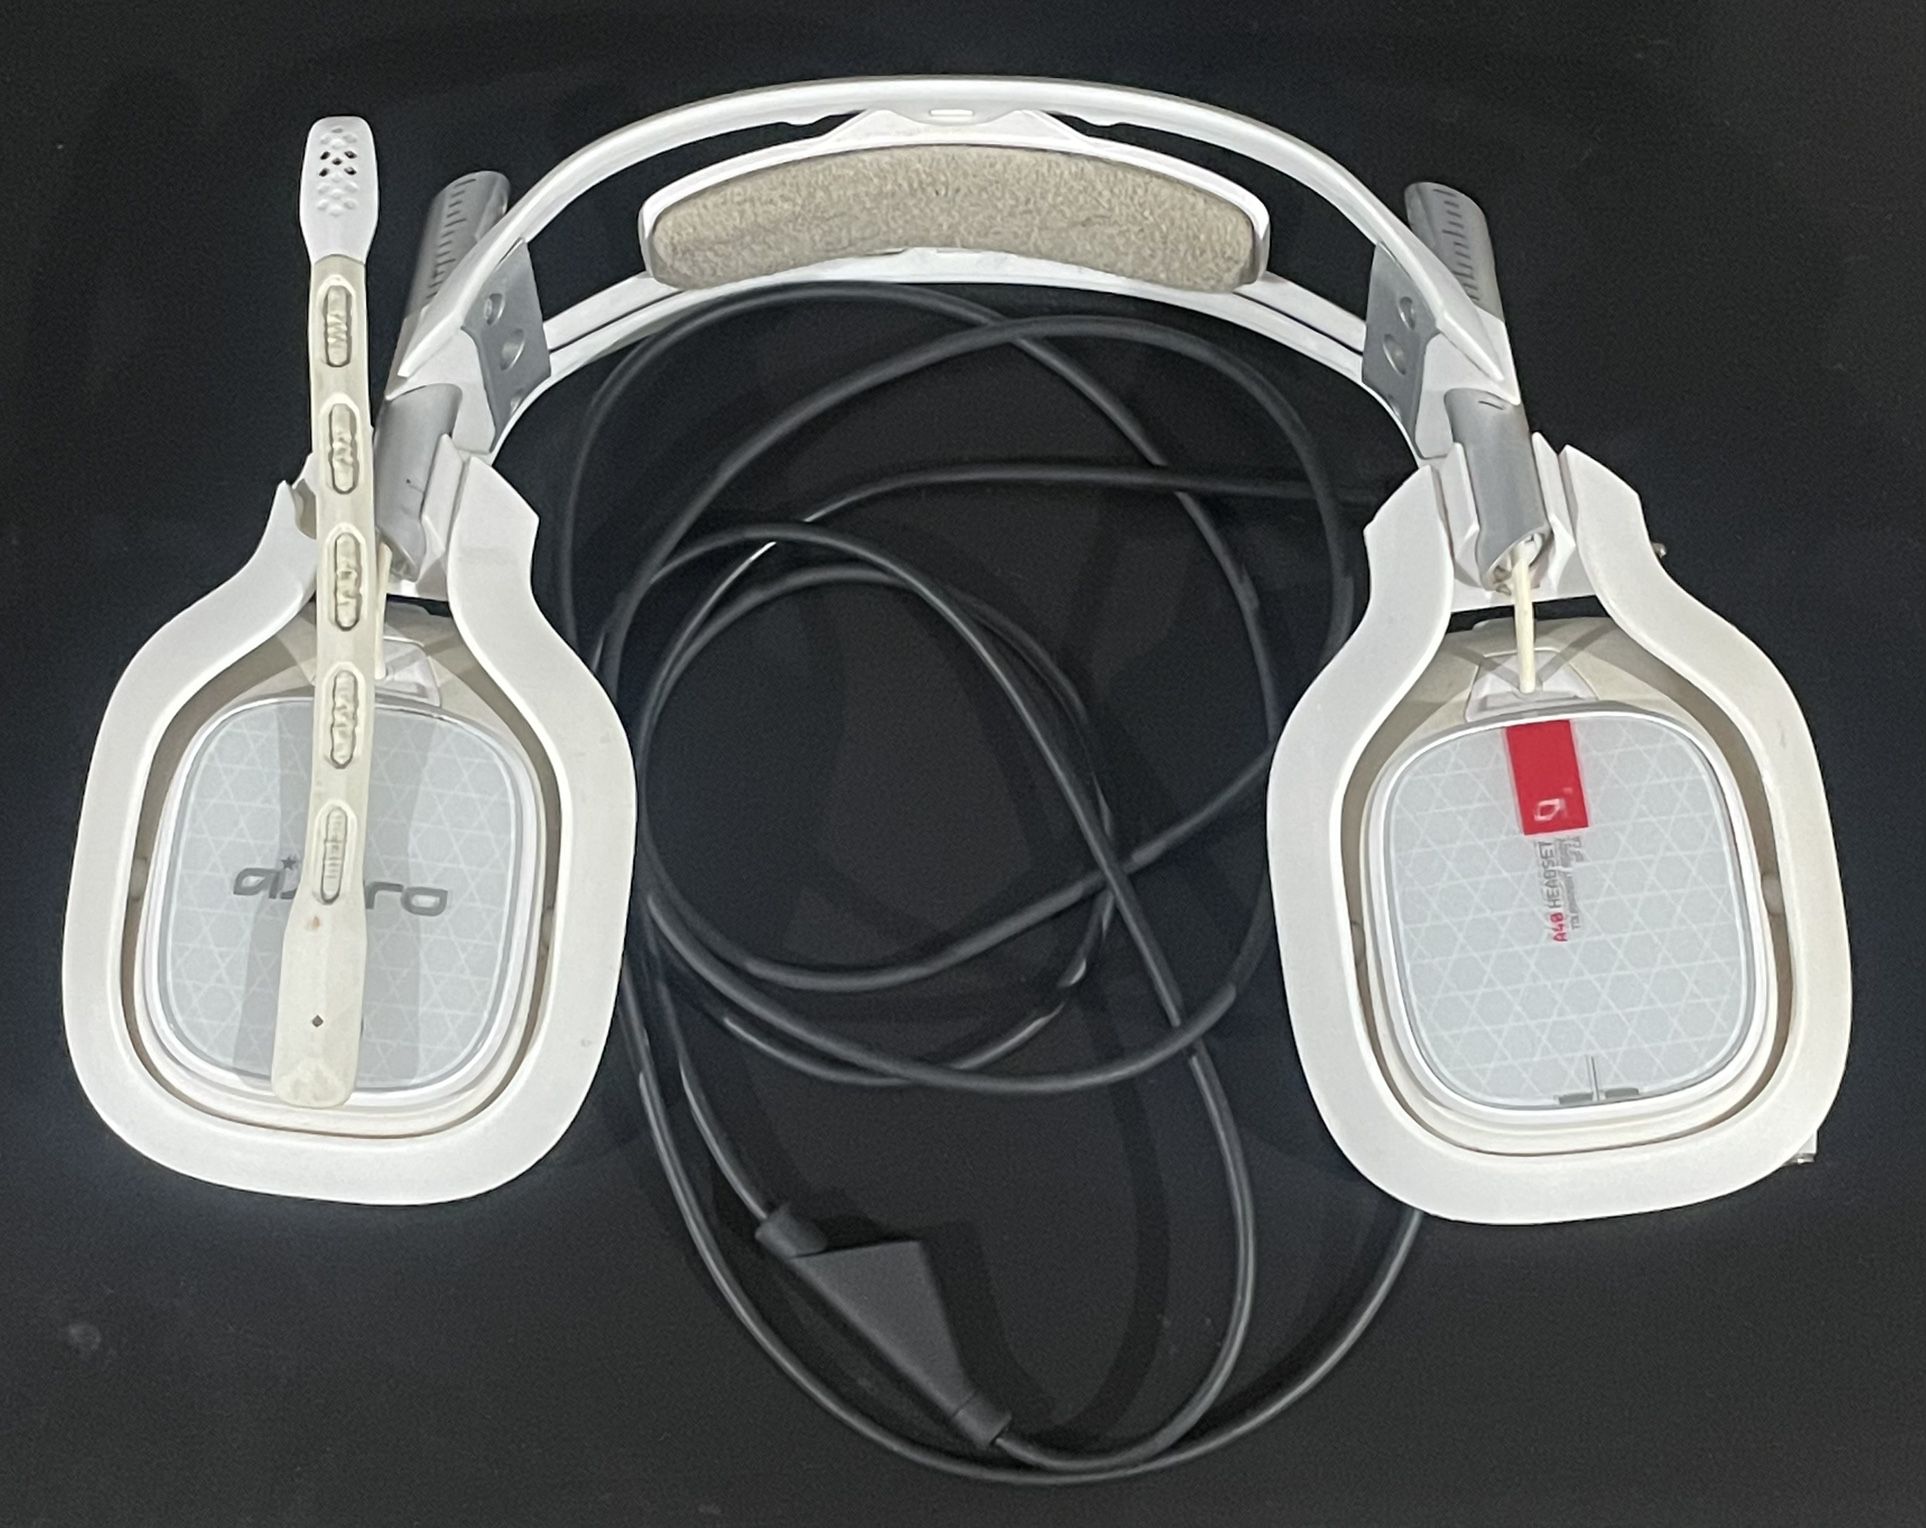 Astro A40 Wired Headset